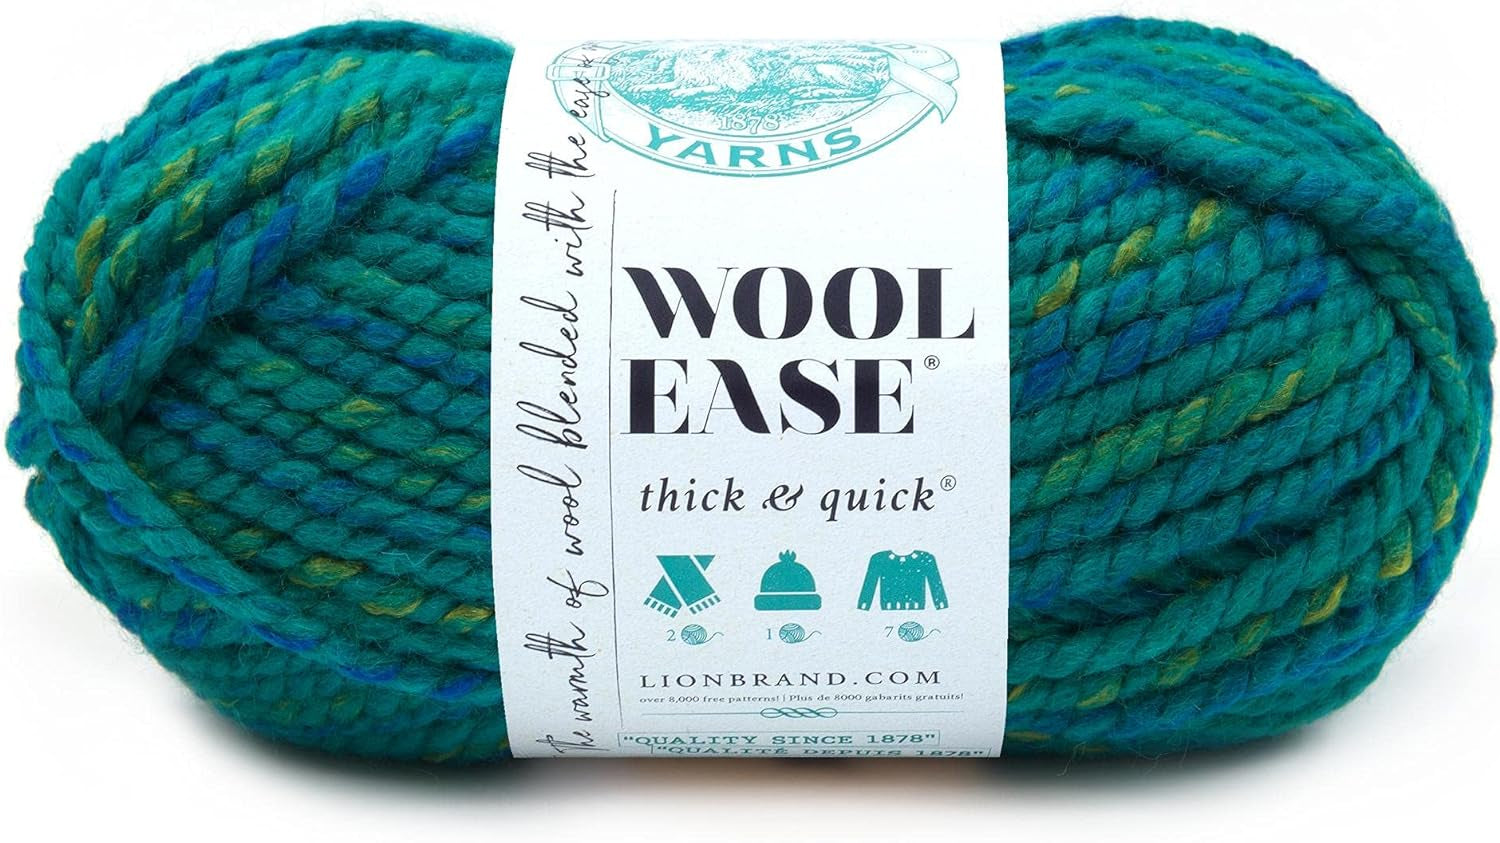 Wool-Ease Thick & Quick Yarn, Soft and Bulky Yarn for Knitting, Crocheting, and Crafting, 1 Skein, Fossil